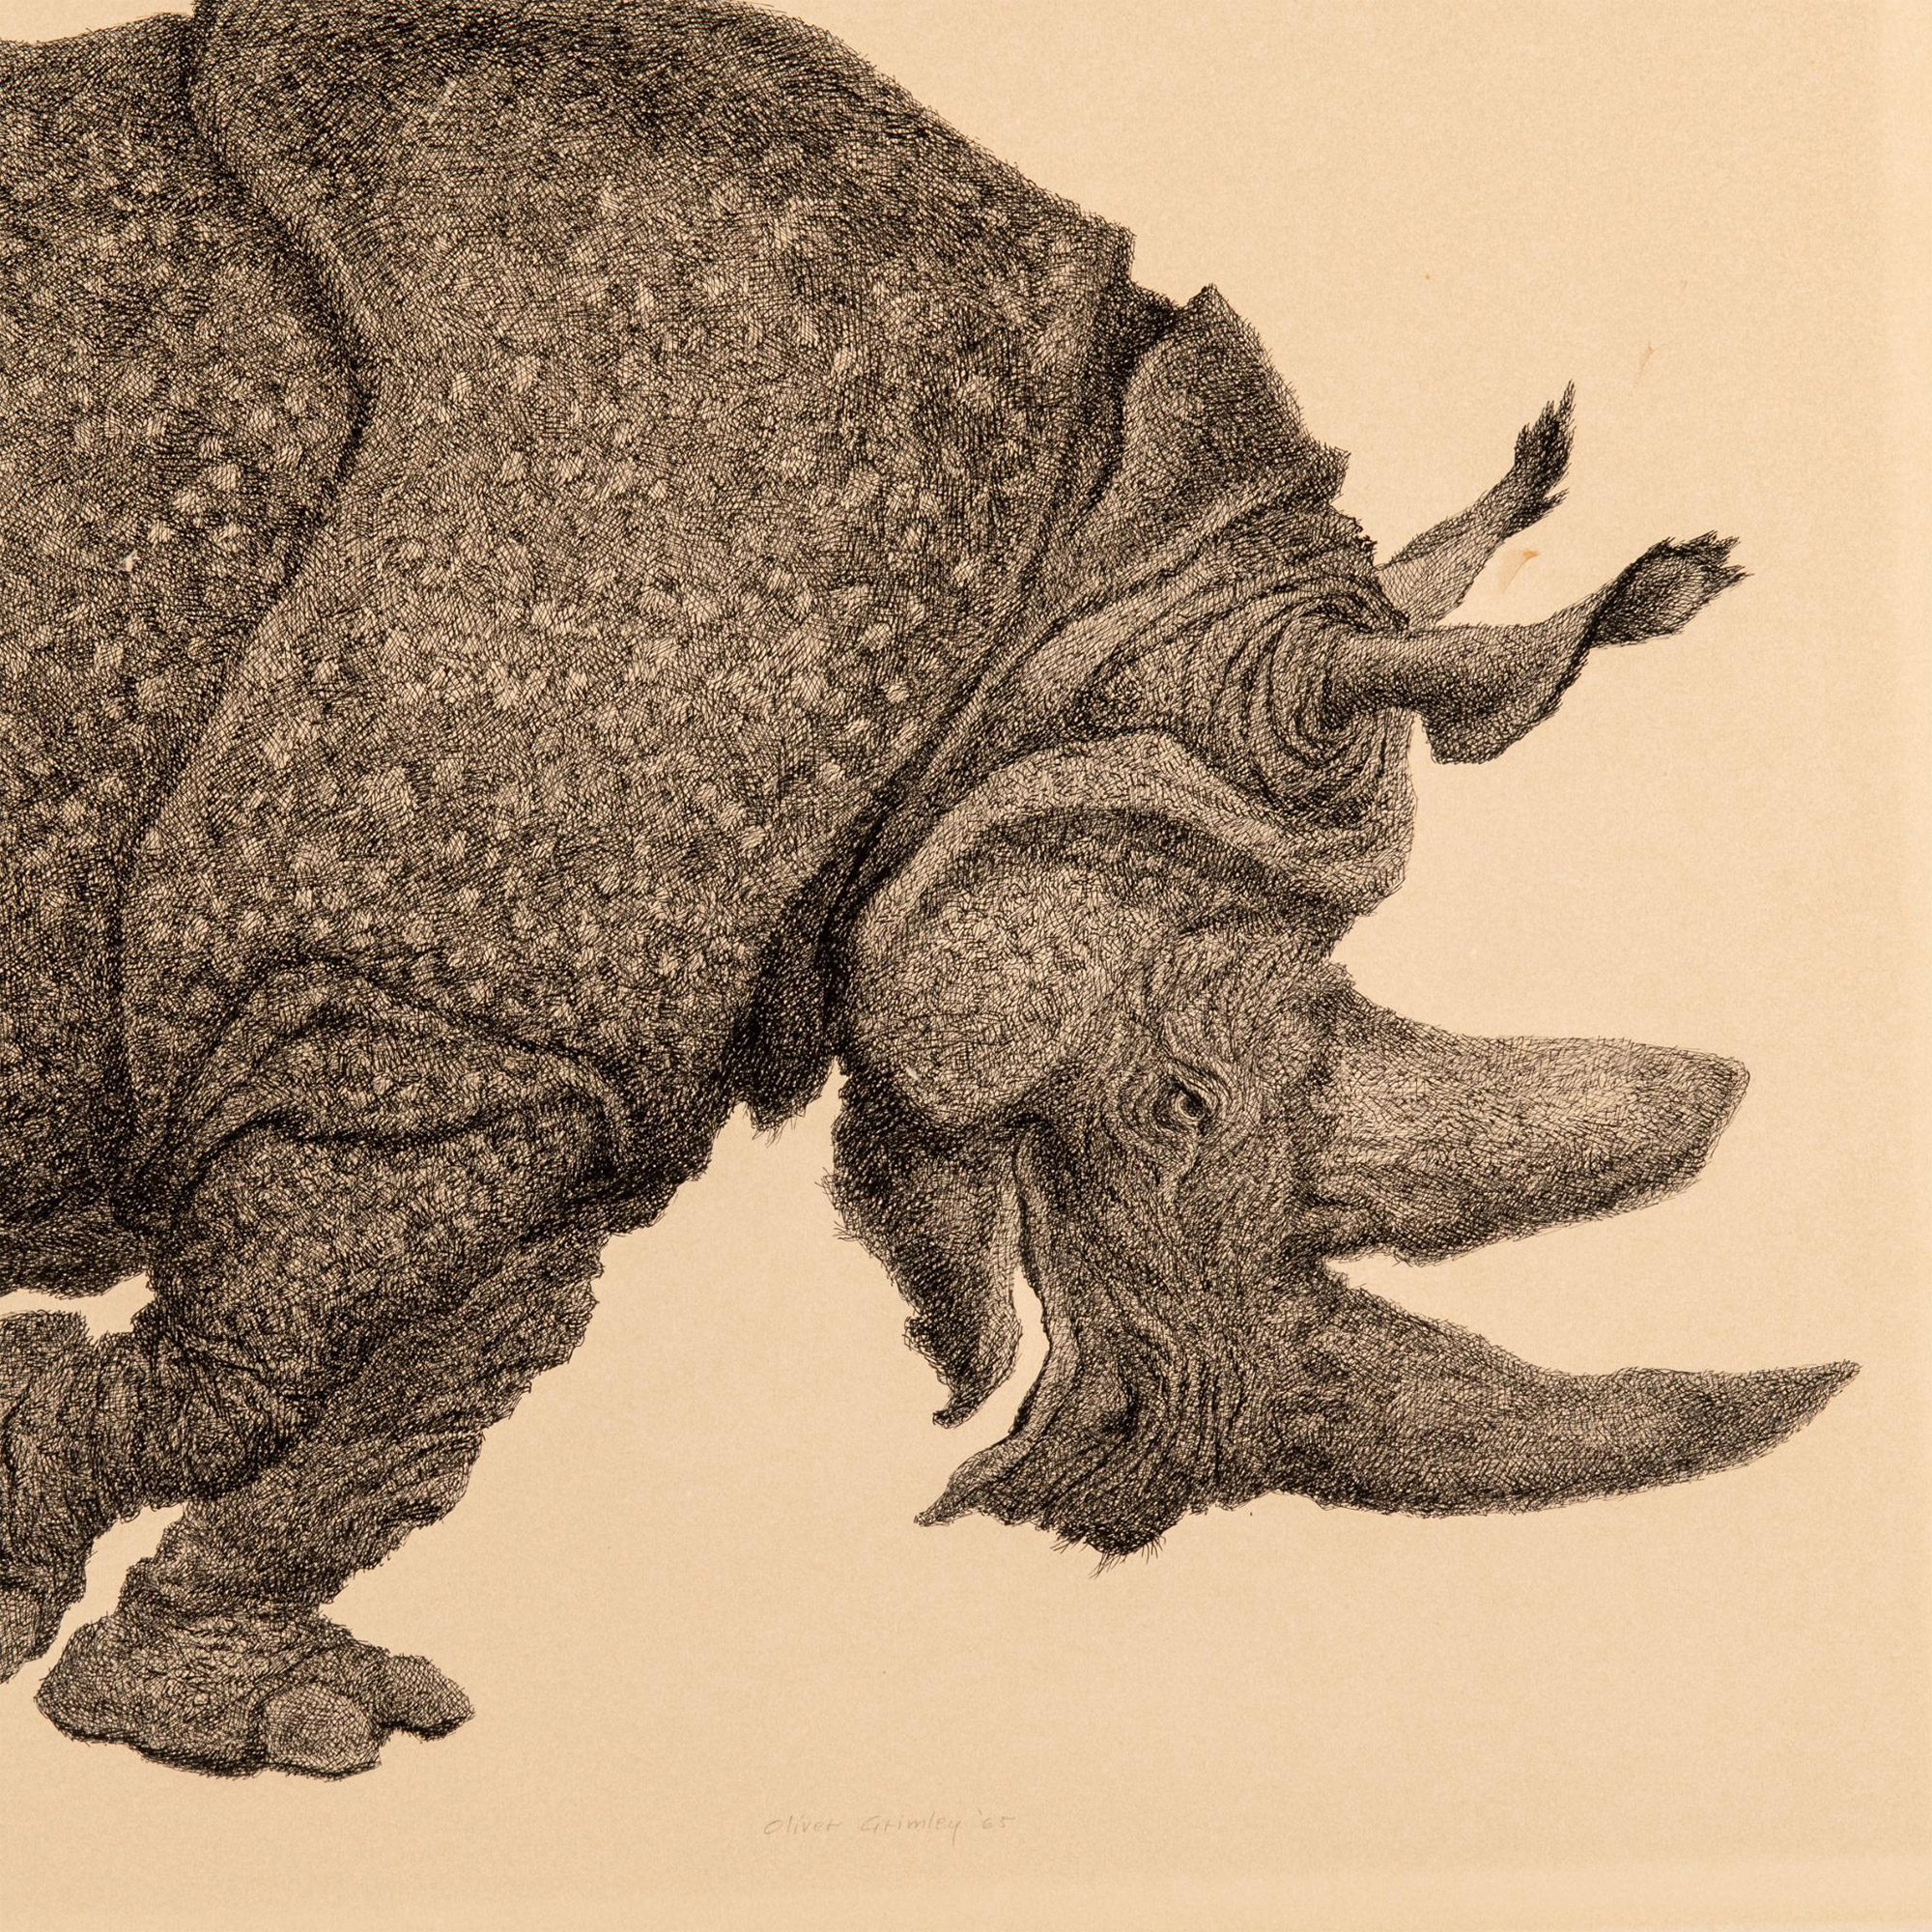 Oliver Grimley, Original Pen & Ink Drawing on Paper, Rhino - Image 3 of 5